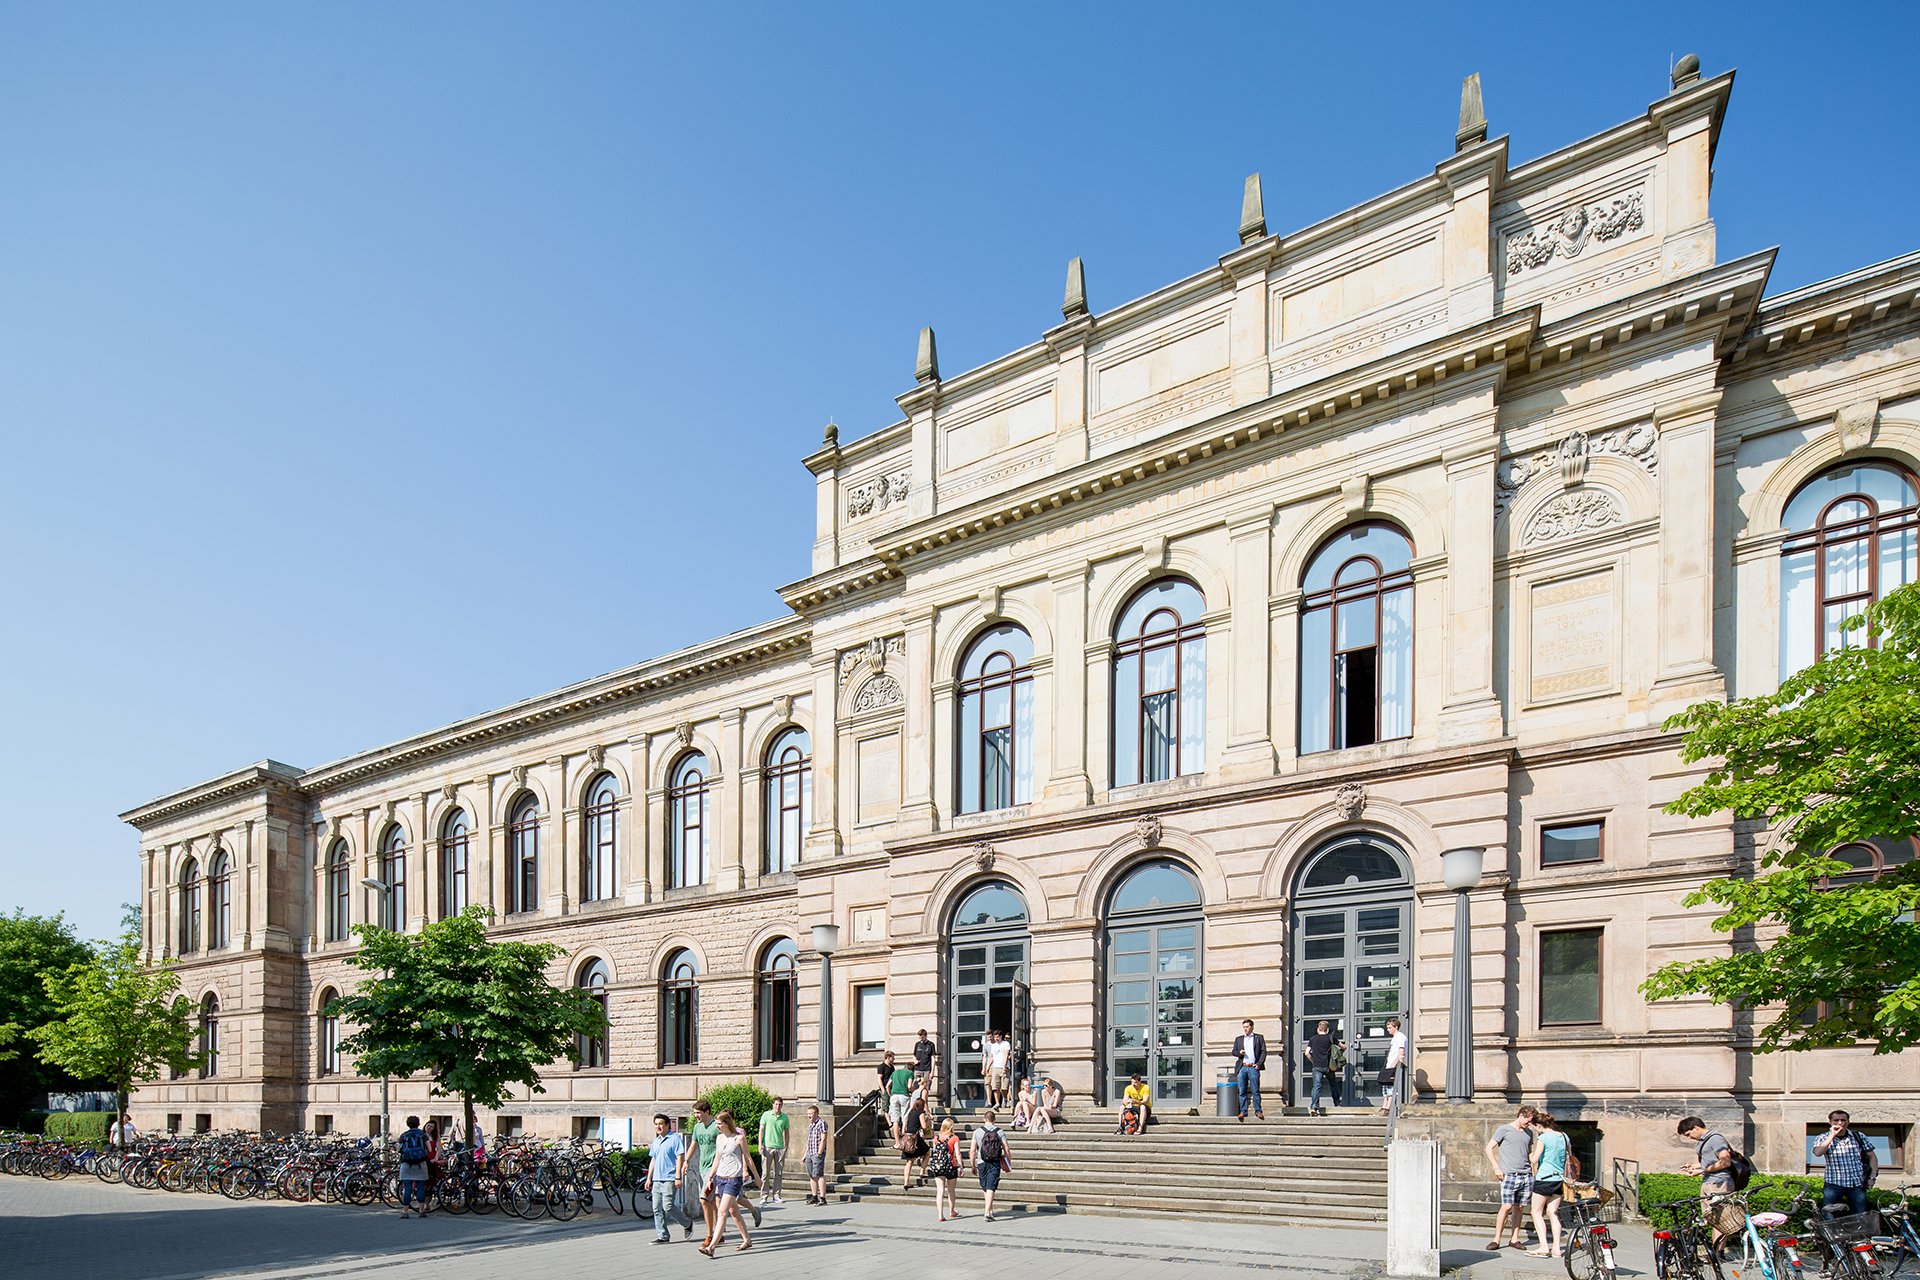 Students in front of the Altgebäude - the Historic Main Building